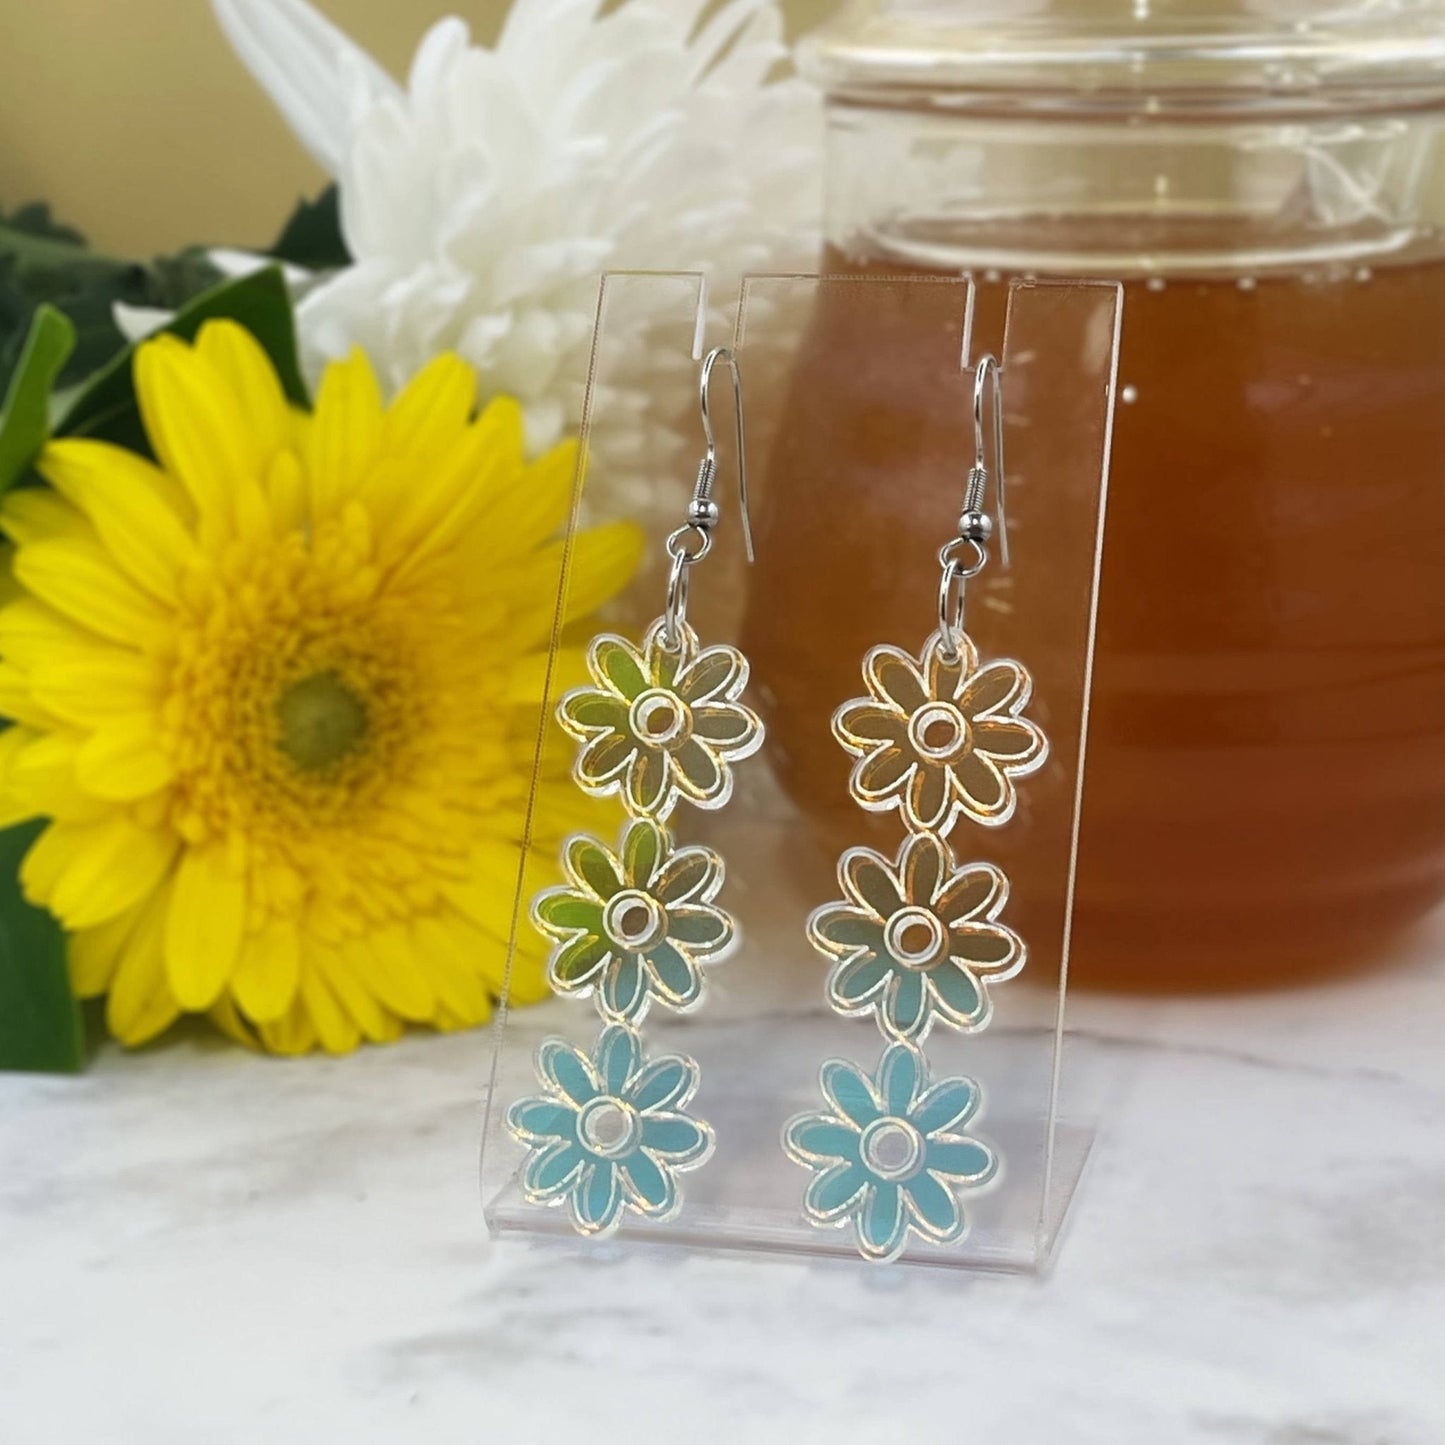 Iridescent Daisychain Earrings - Lost Minds Clothing